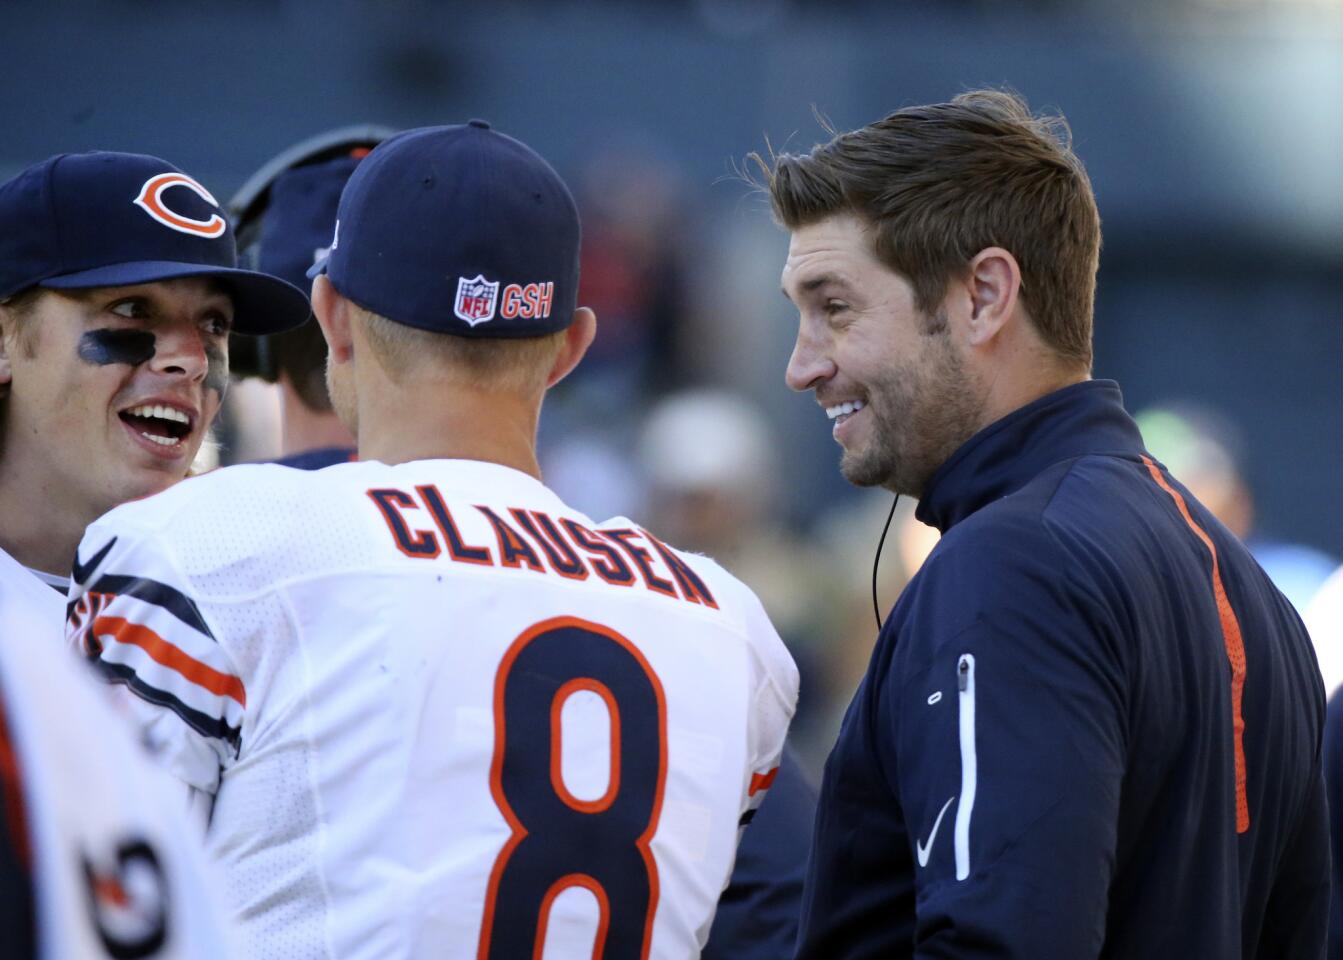 Bears quarterbacks David Fales, Jimmy Clausen and Jay Cutler during the game against the Seahawks.